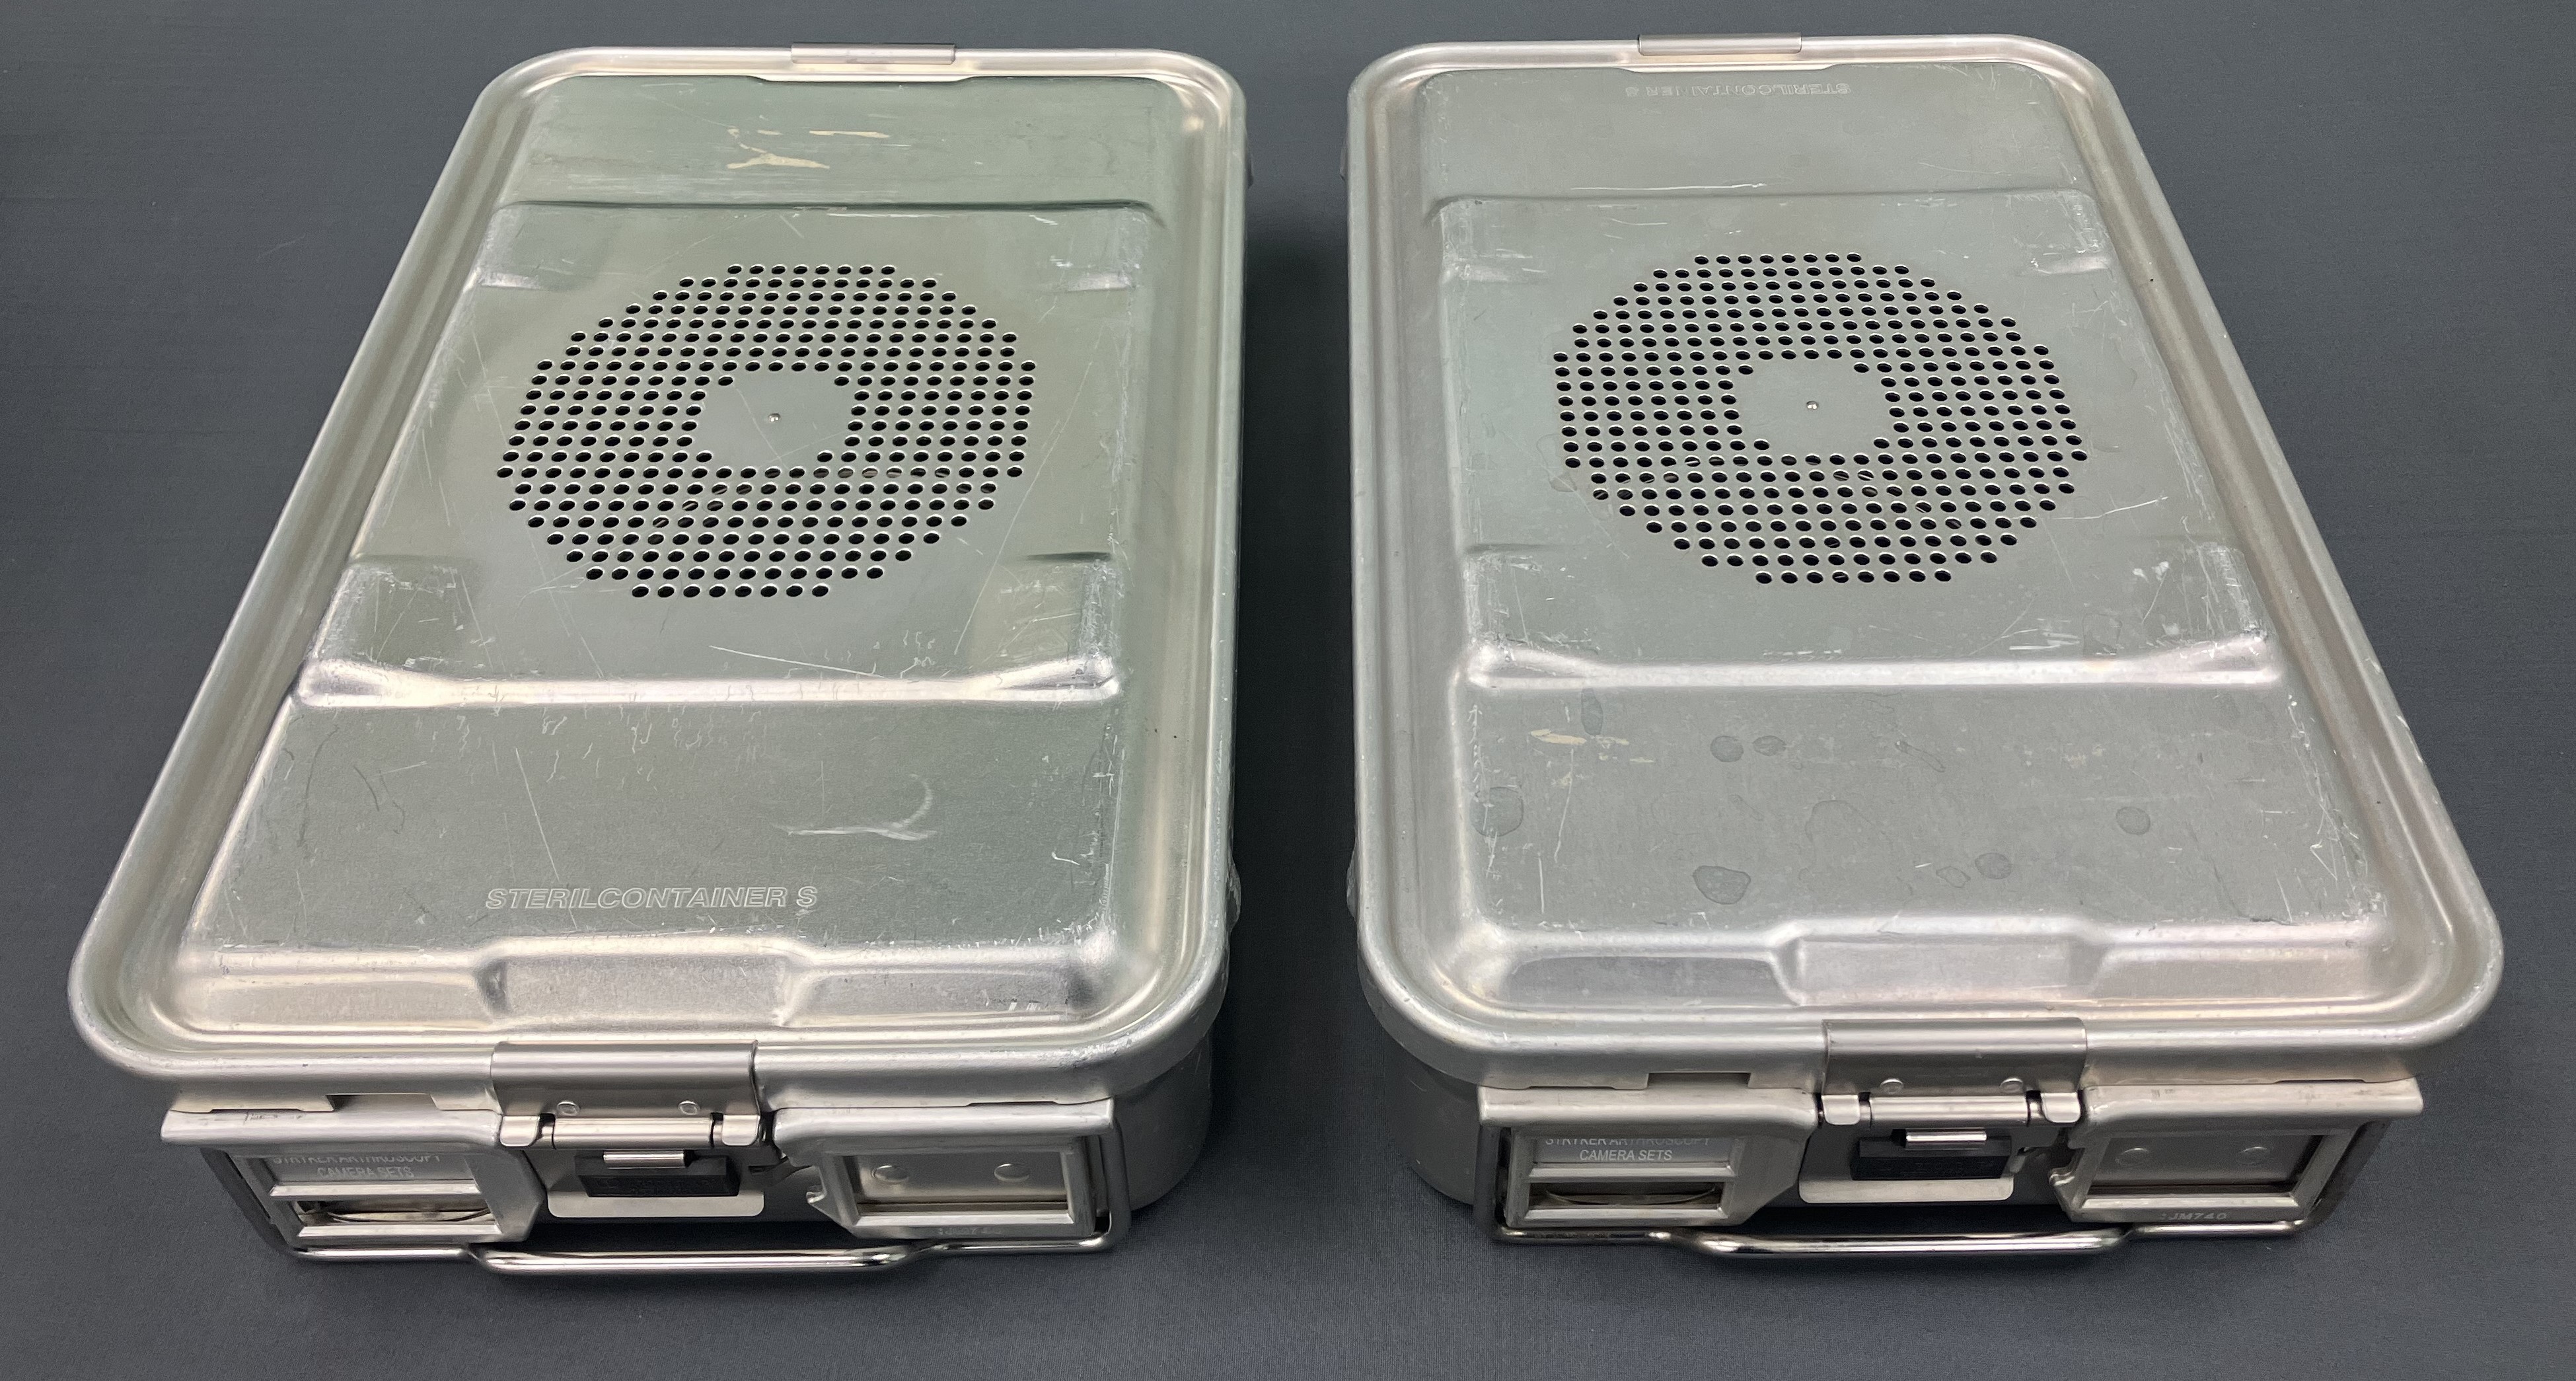 Aesculap JM740 Sterilization Container with JM789 Lid – Lot of 2